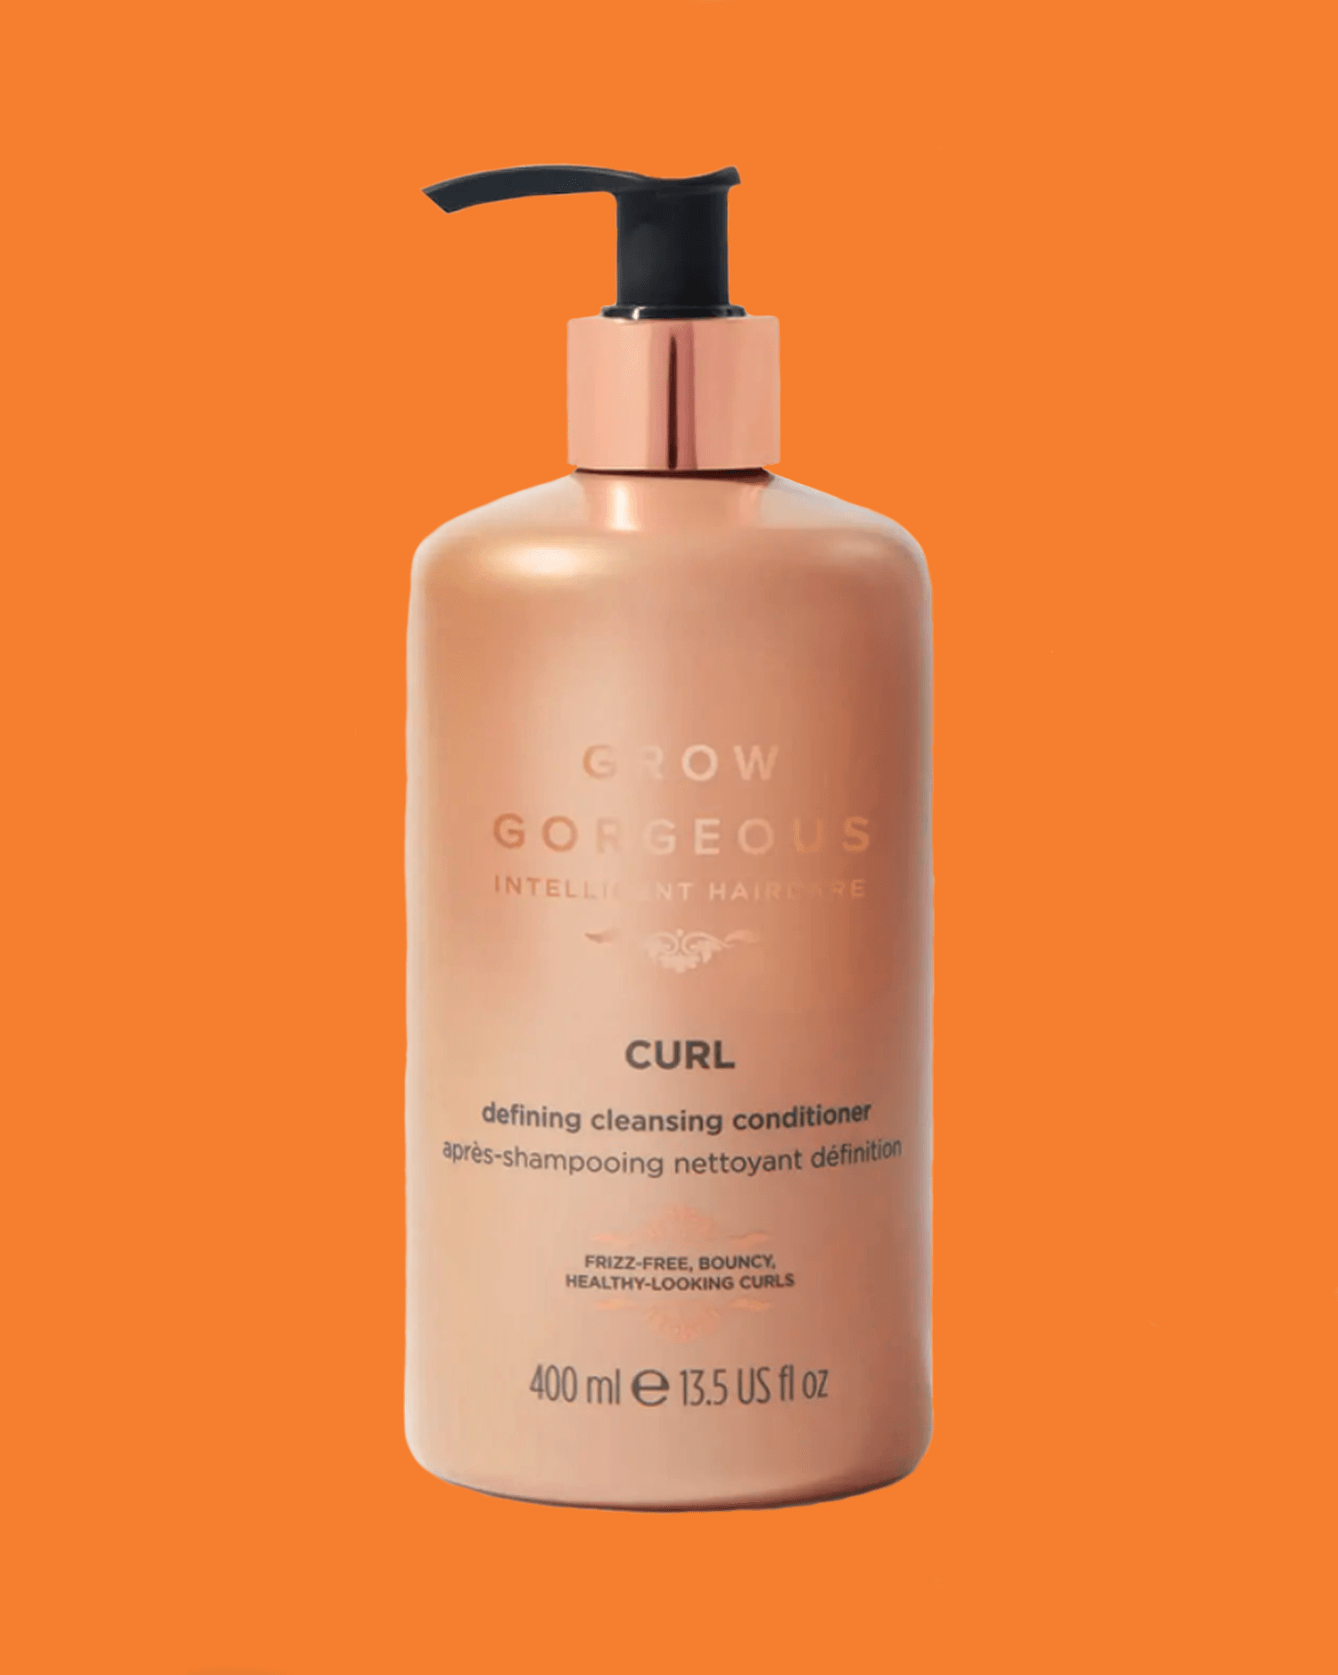 Product photo of Grow Gorgeous Curl Defining Cleaning Conditioner.